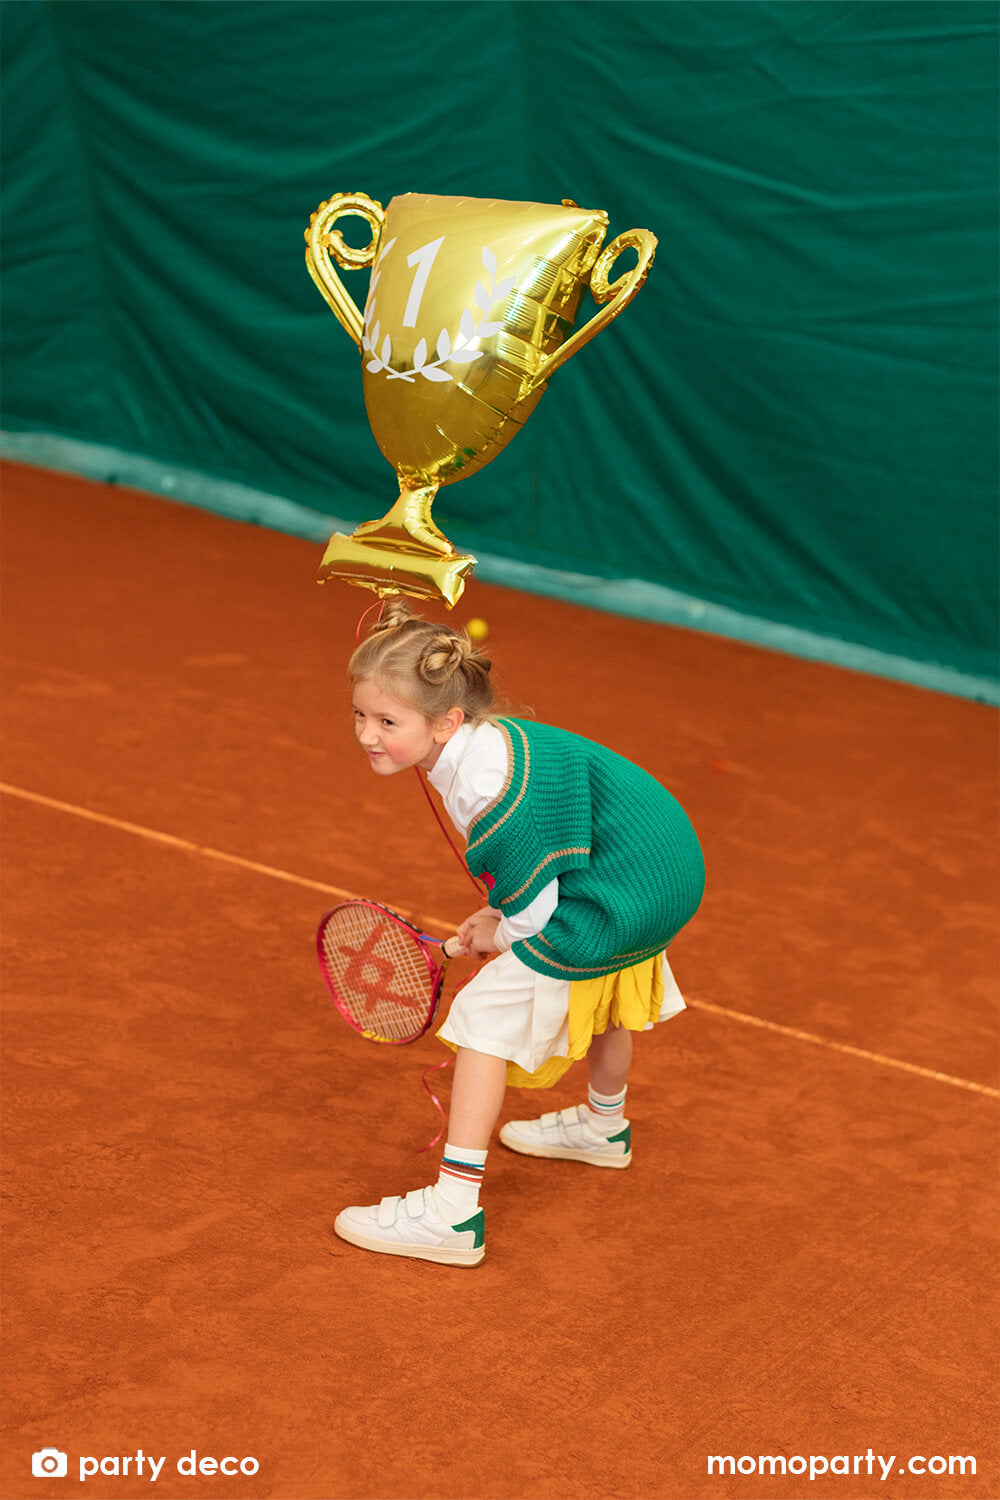 A little girl in school uniform holding her tennis racket in a gam with Party Deco's Party Deco's 28" gold cup trophy shaped foil balloon in glossy material with number 1 on it, celebrating her win in a tennis court